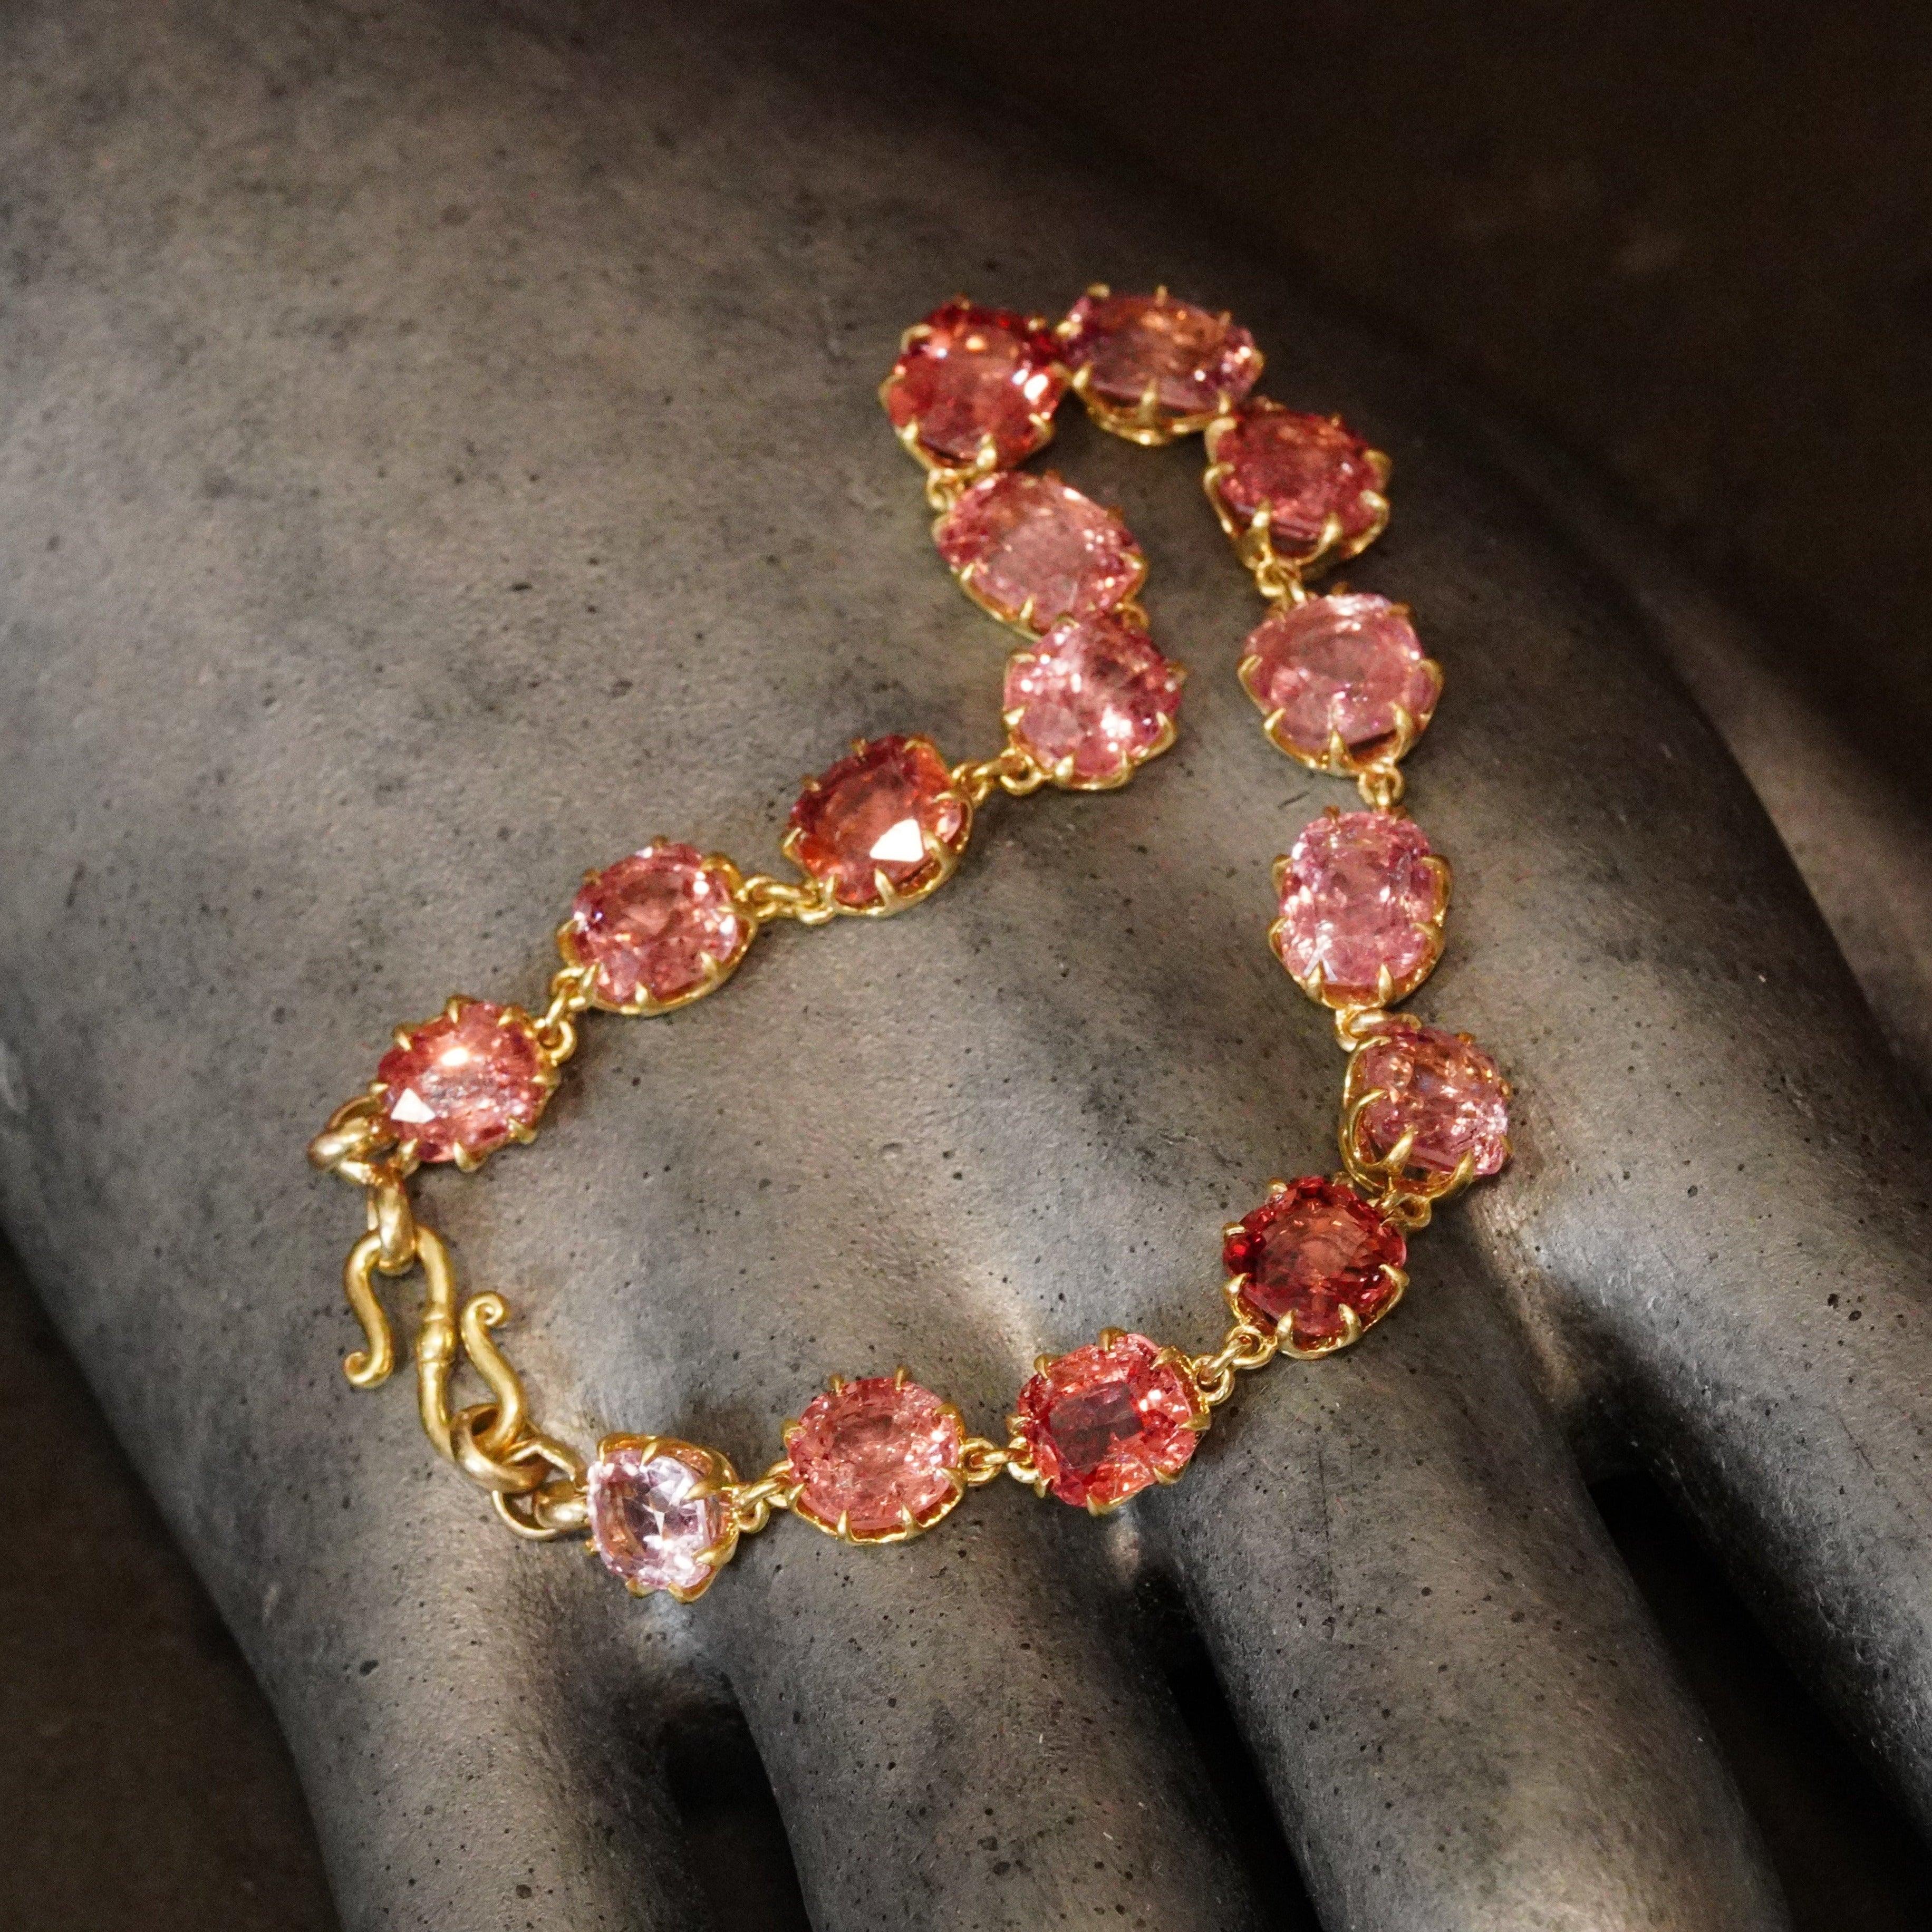 Luxury bracelet featuring the Pink Sunset: A Victorian-Style 27 CT Cushion Cut Pink Spinel by Jogani